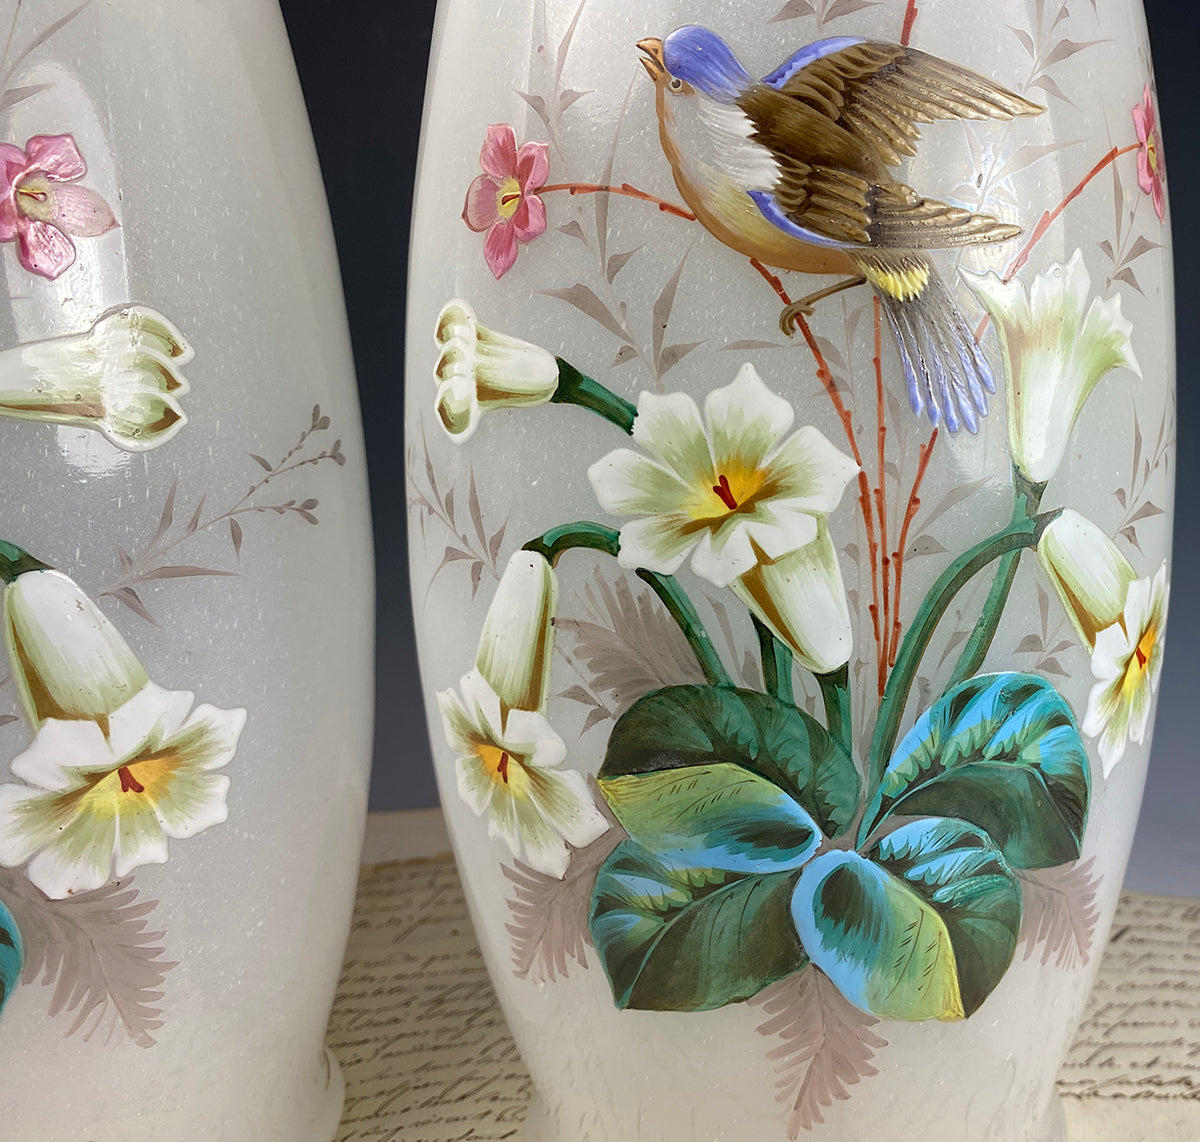 Huge 11" Tall PAIR (2) Antique French Opaline Alter Vases, LeGras, Thick Enamel Florals and Birds, Lily